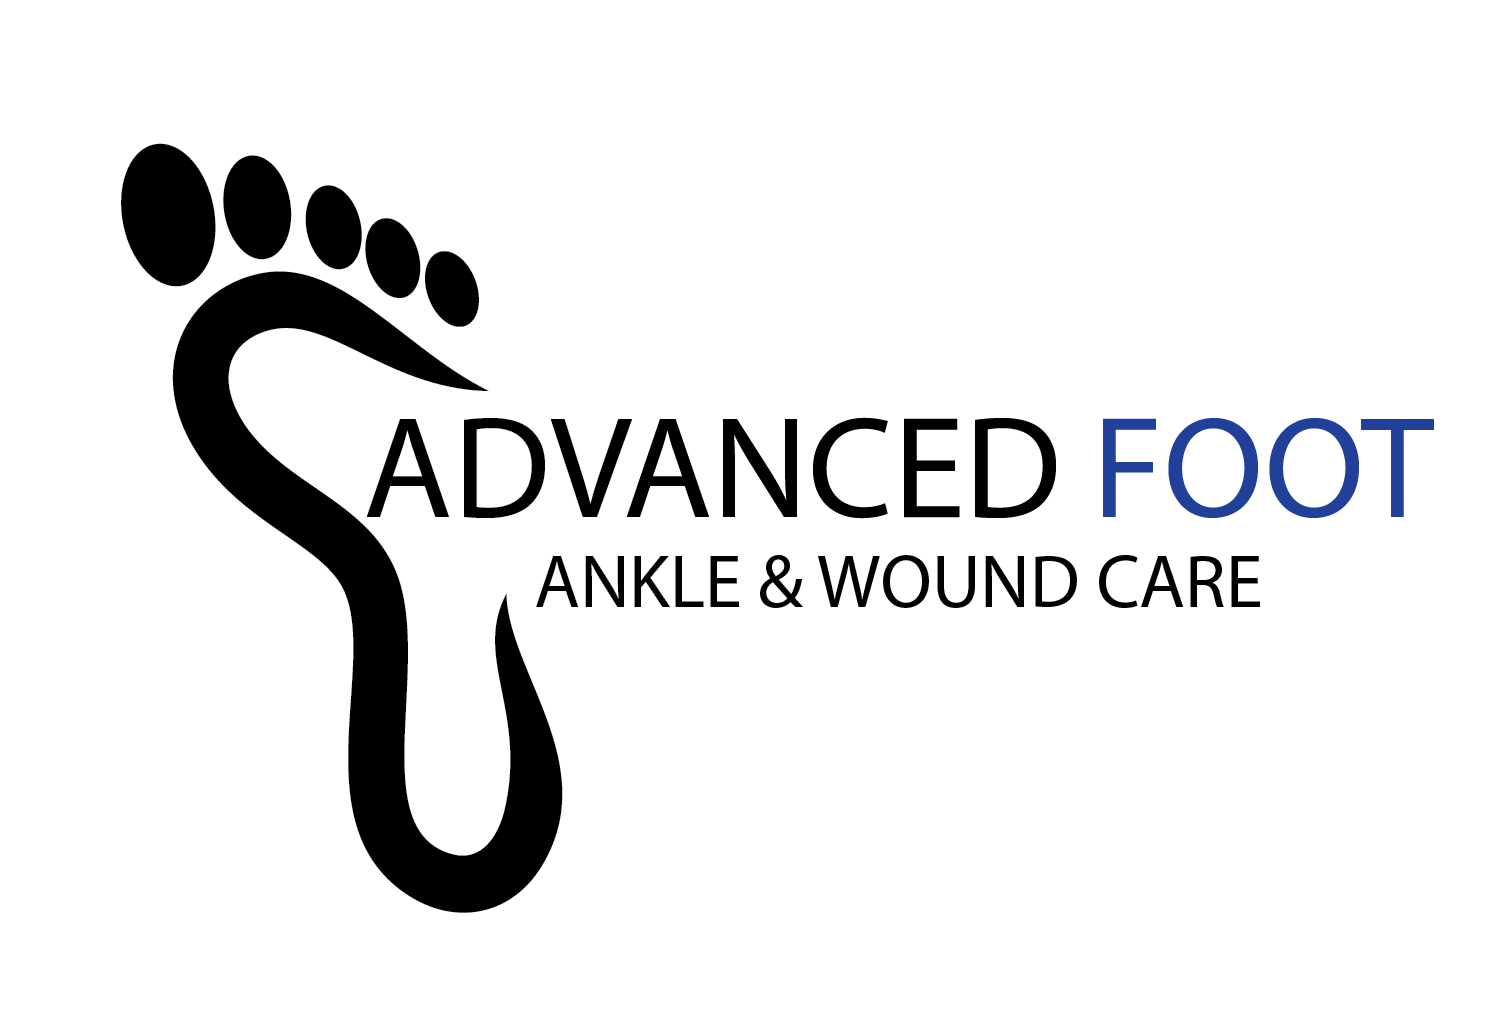 https://usahockeyclubofmichigan.teamsnapsites.com/wp-content/uploads/sites/118/2023/01/ADVANCED-FOOT-ANKLE-AND-WOUND-CARE.png